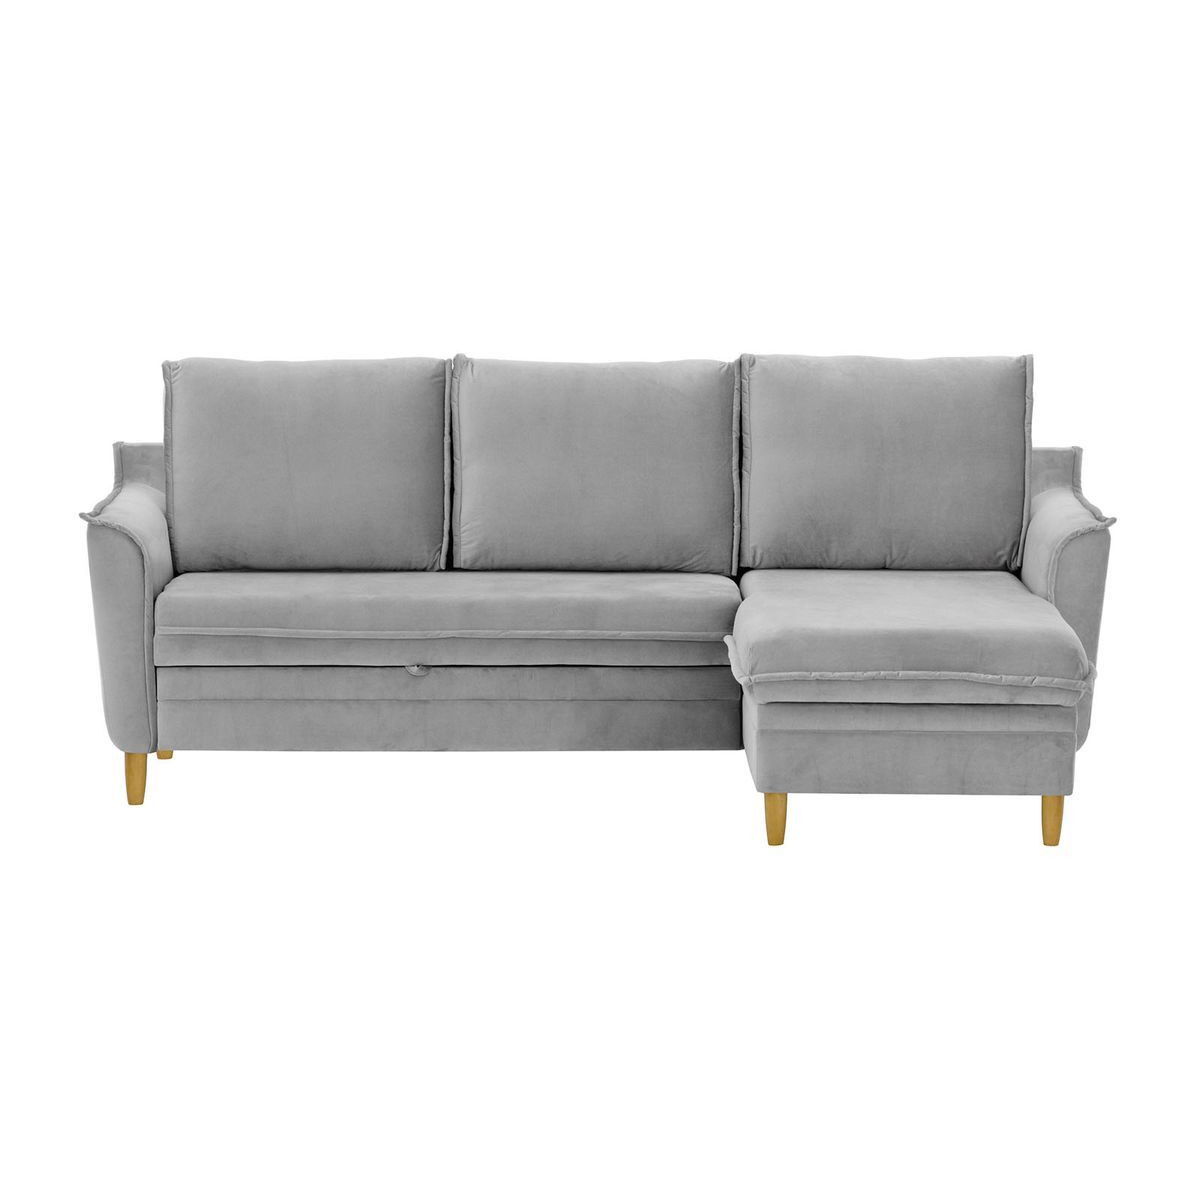 Amour Corner Sofa Bed With Storage, silver - image 1